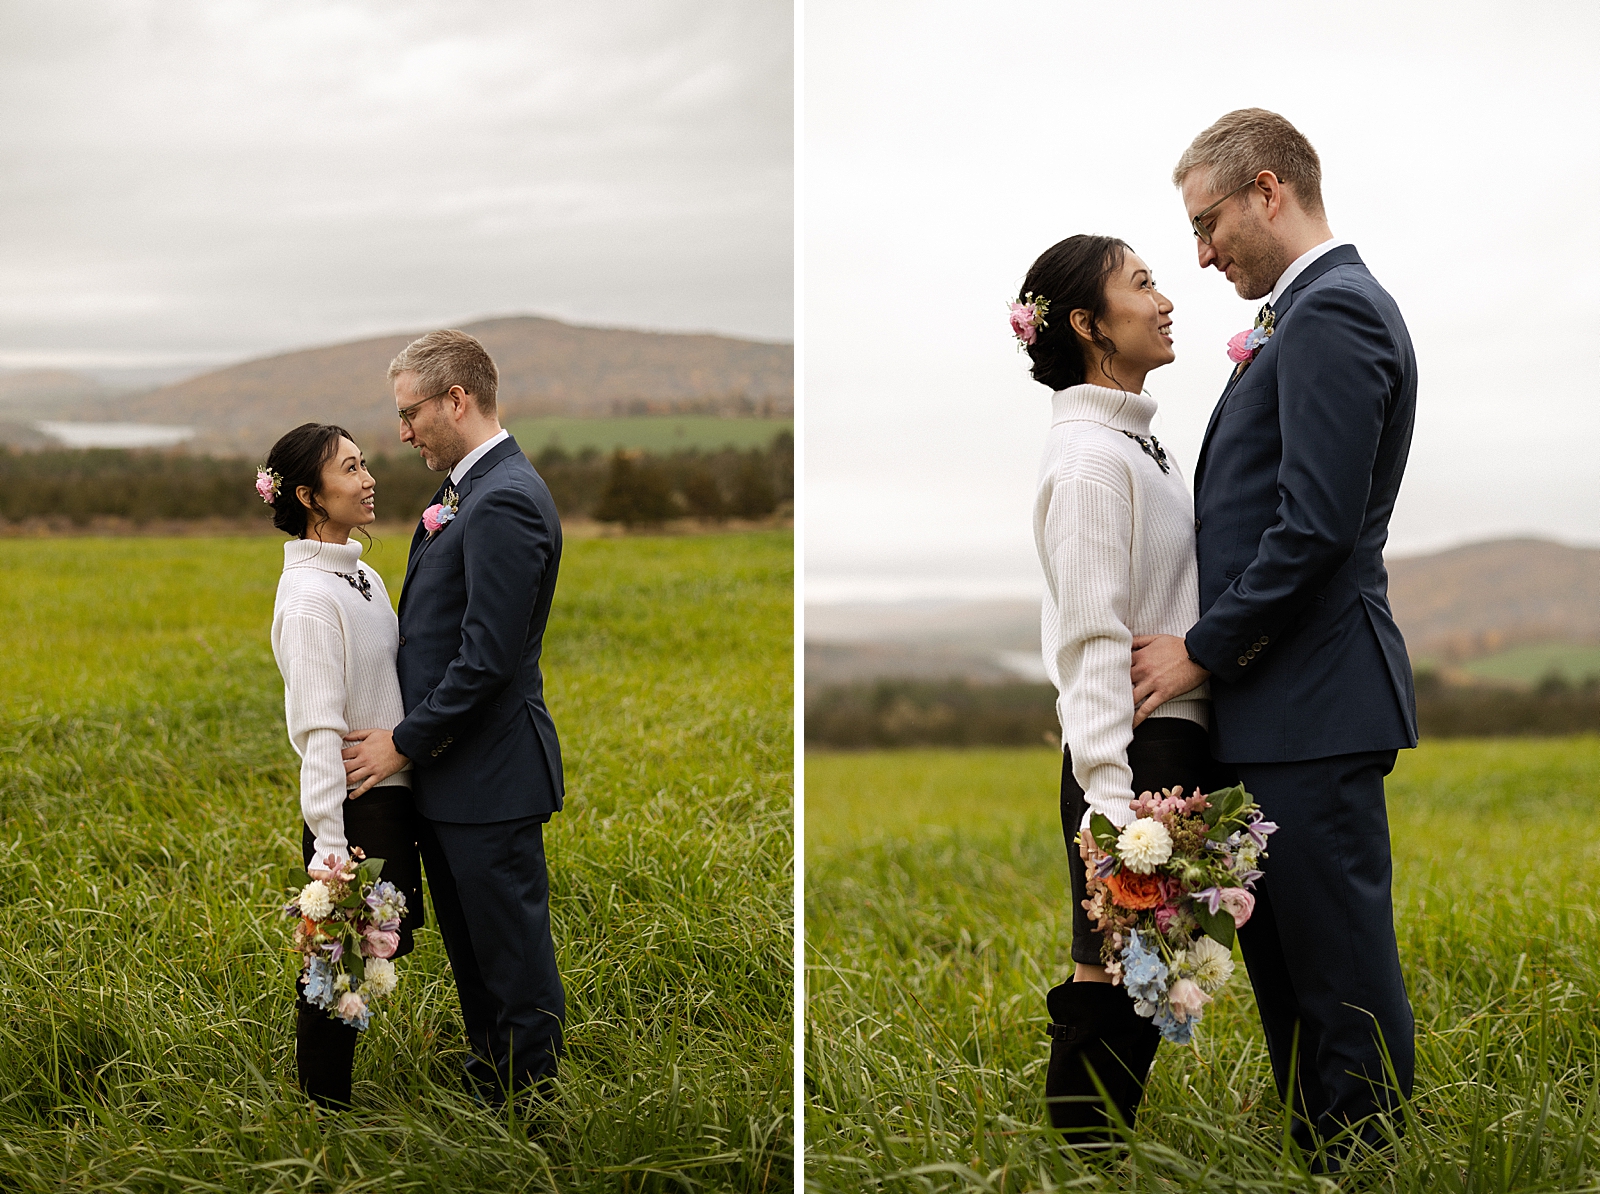 Bride and Groom standing in front of each other on grassy field